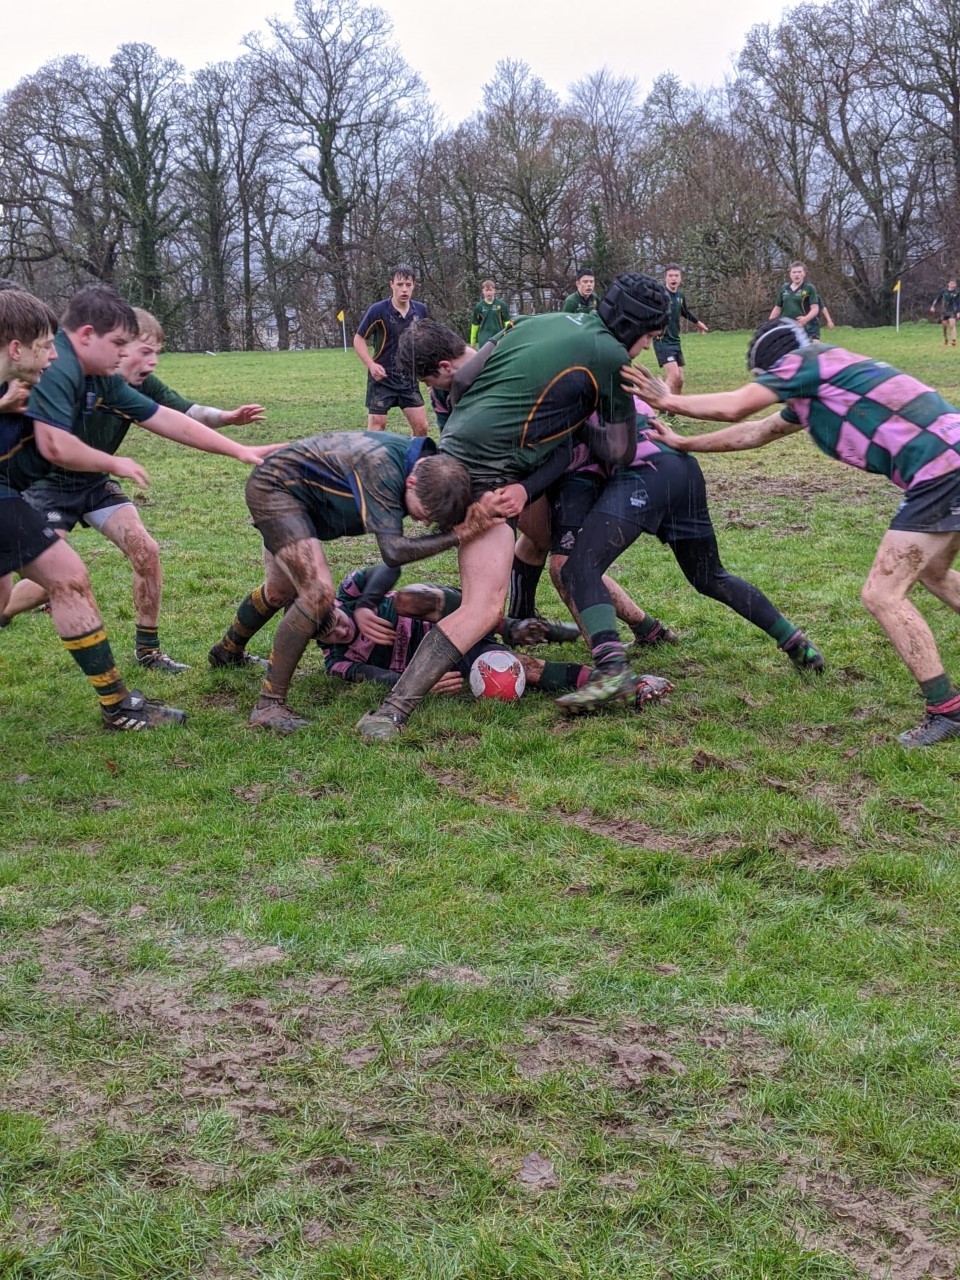 Helensburgh Rugby Clubs youth section is in rude health, according to Ian Smith - though the hunt for more players, and more parental involvement, is never-ending